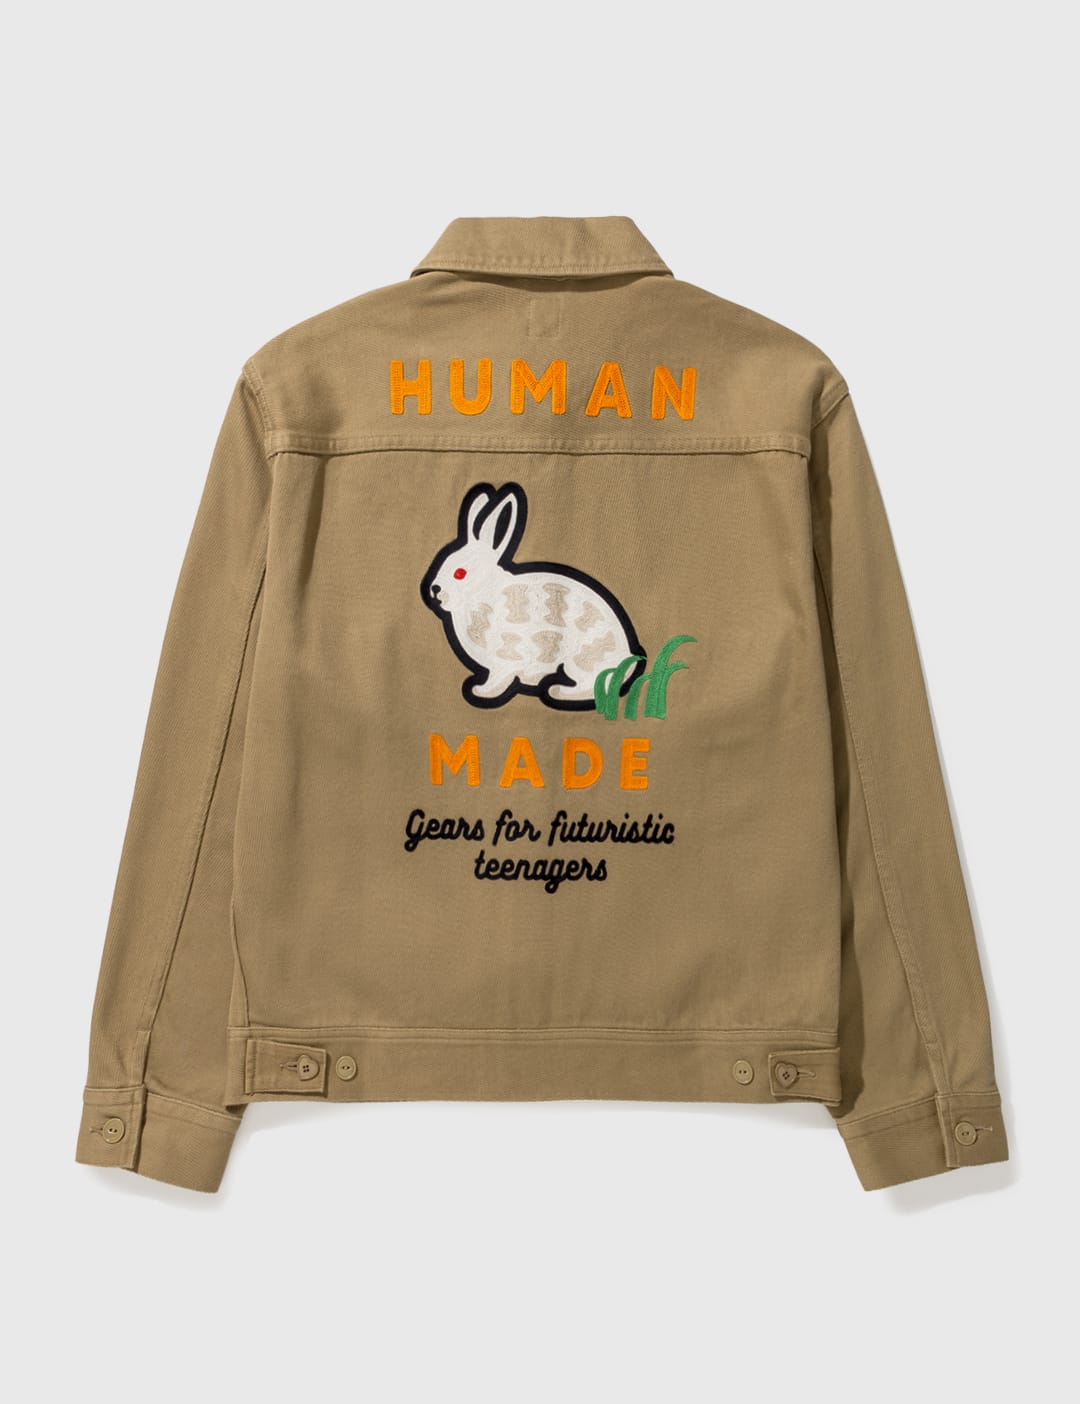 Human Made - Zip Work Jacket | HBX - Globally Curated Fashion 